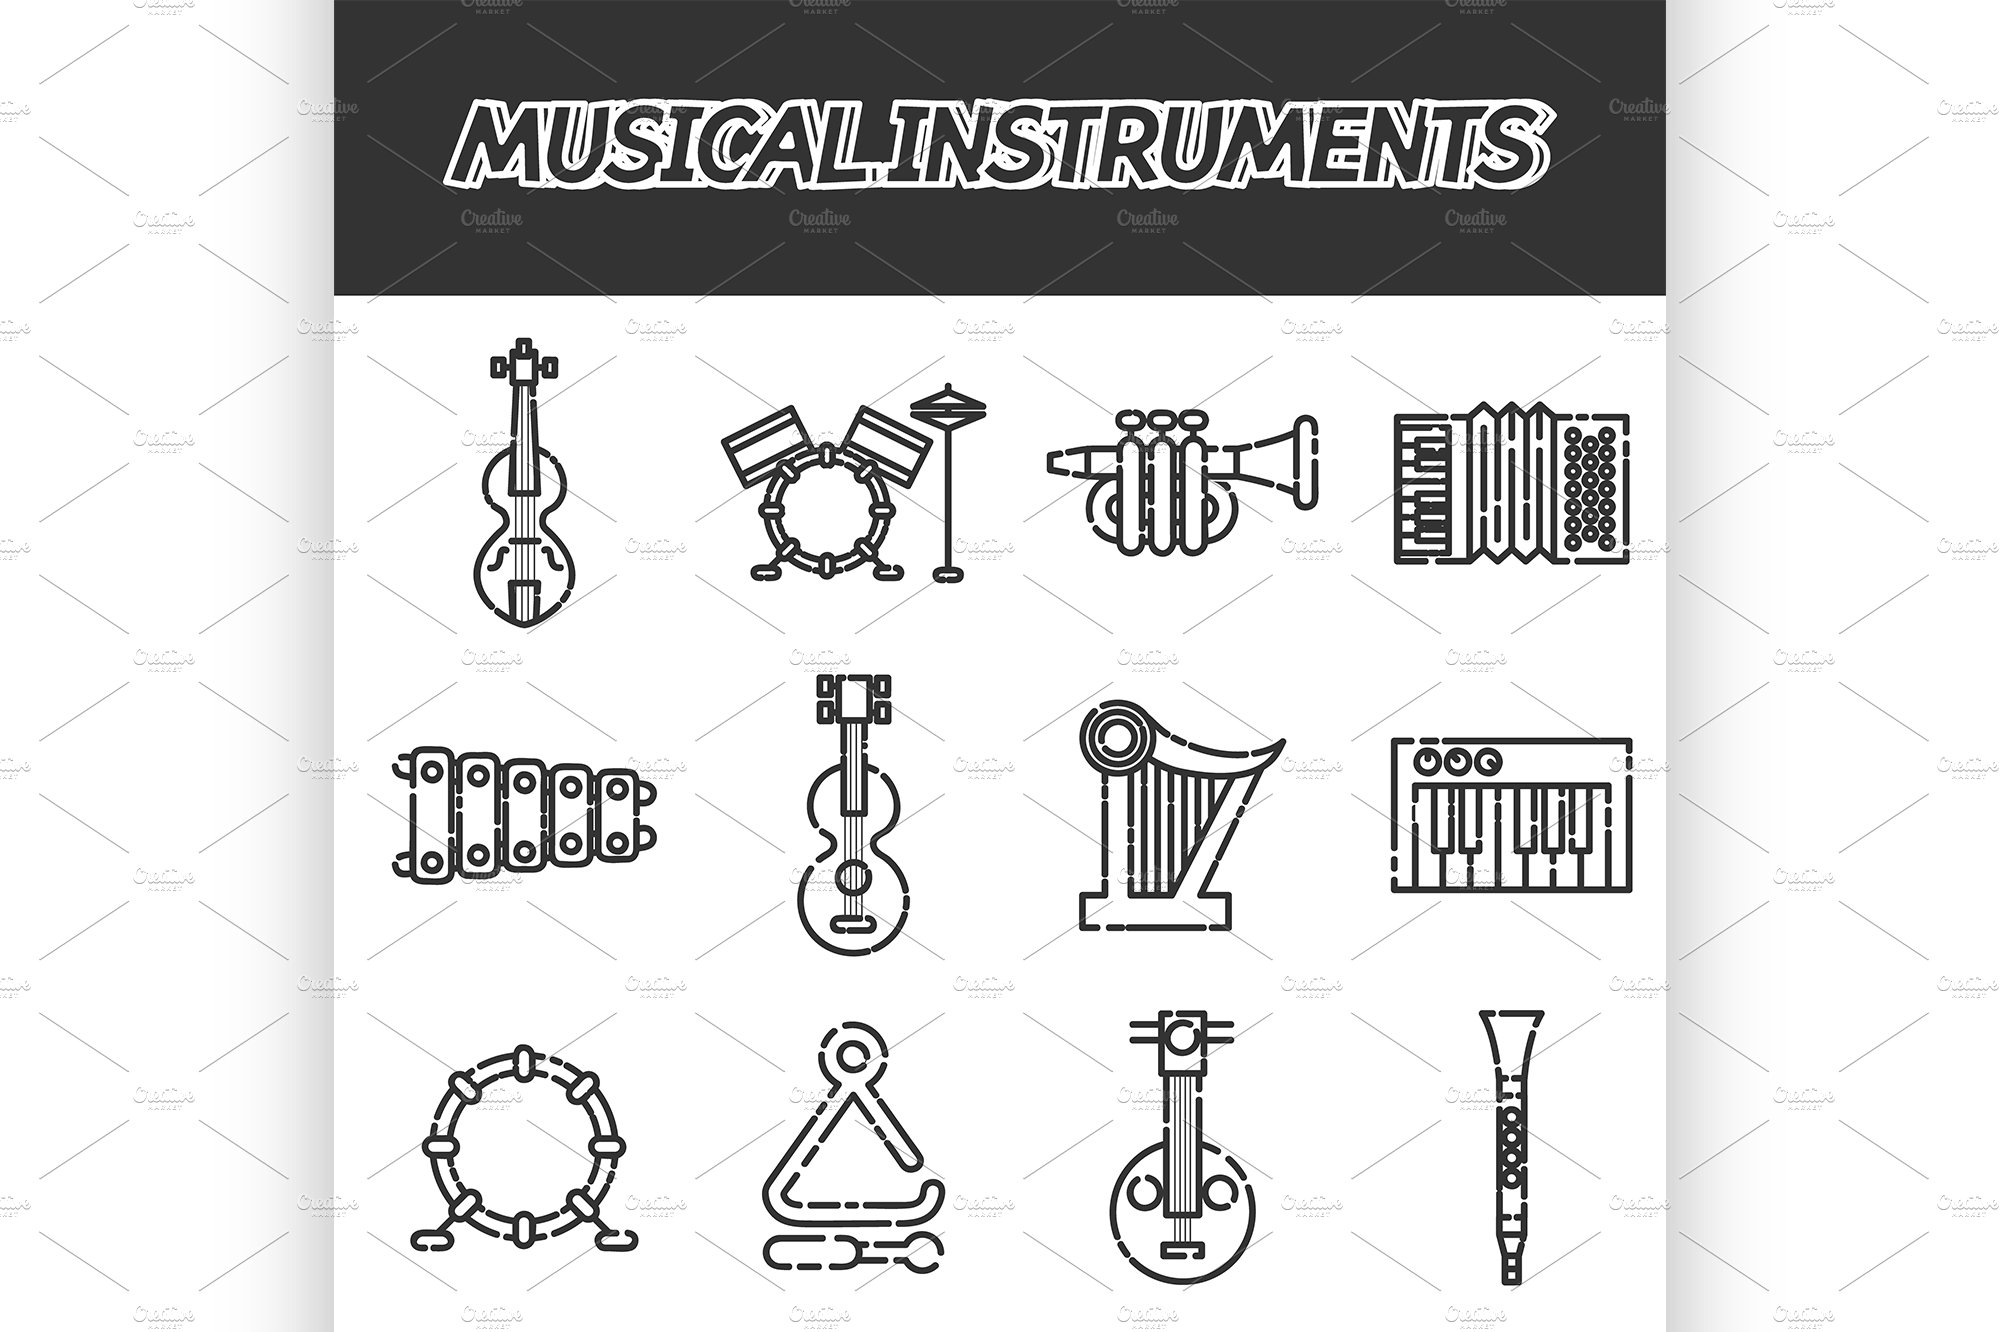 Musical instruments icon set cover image.